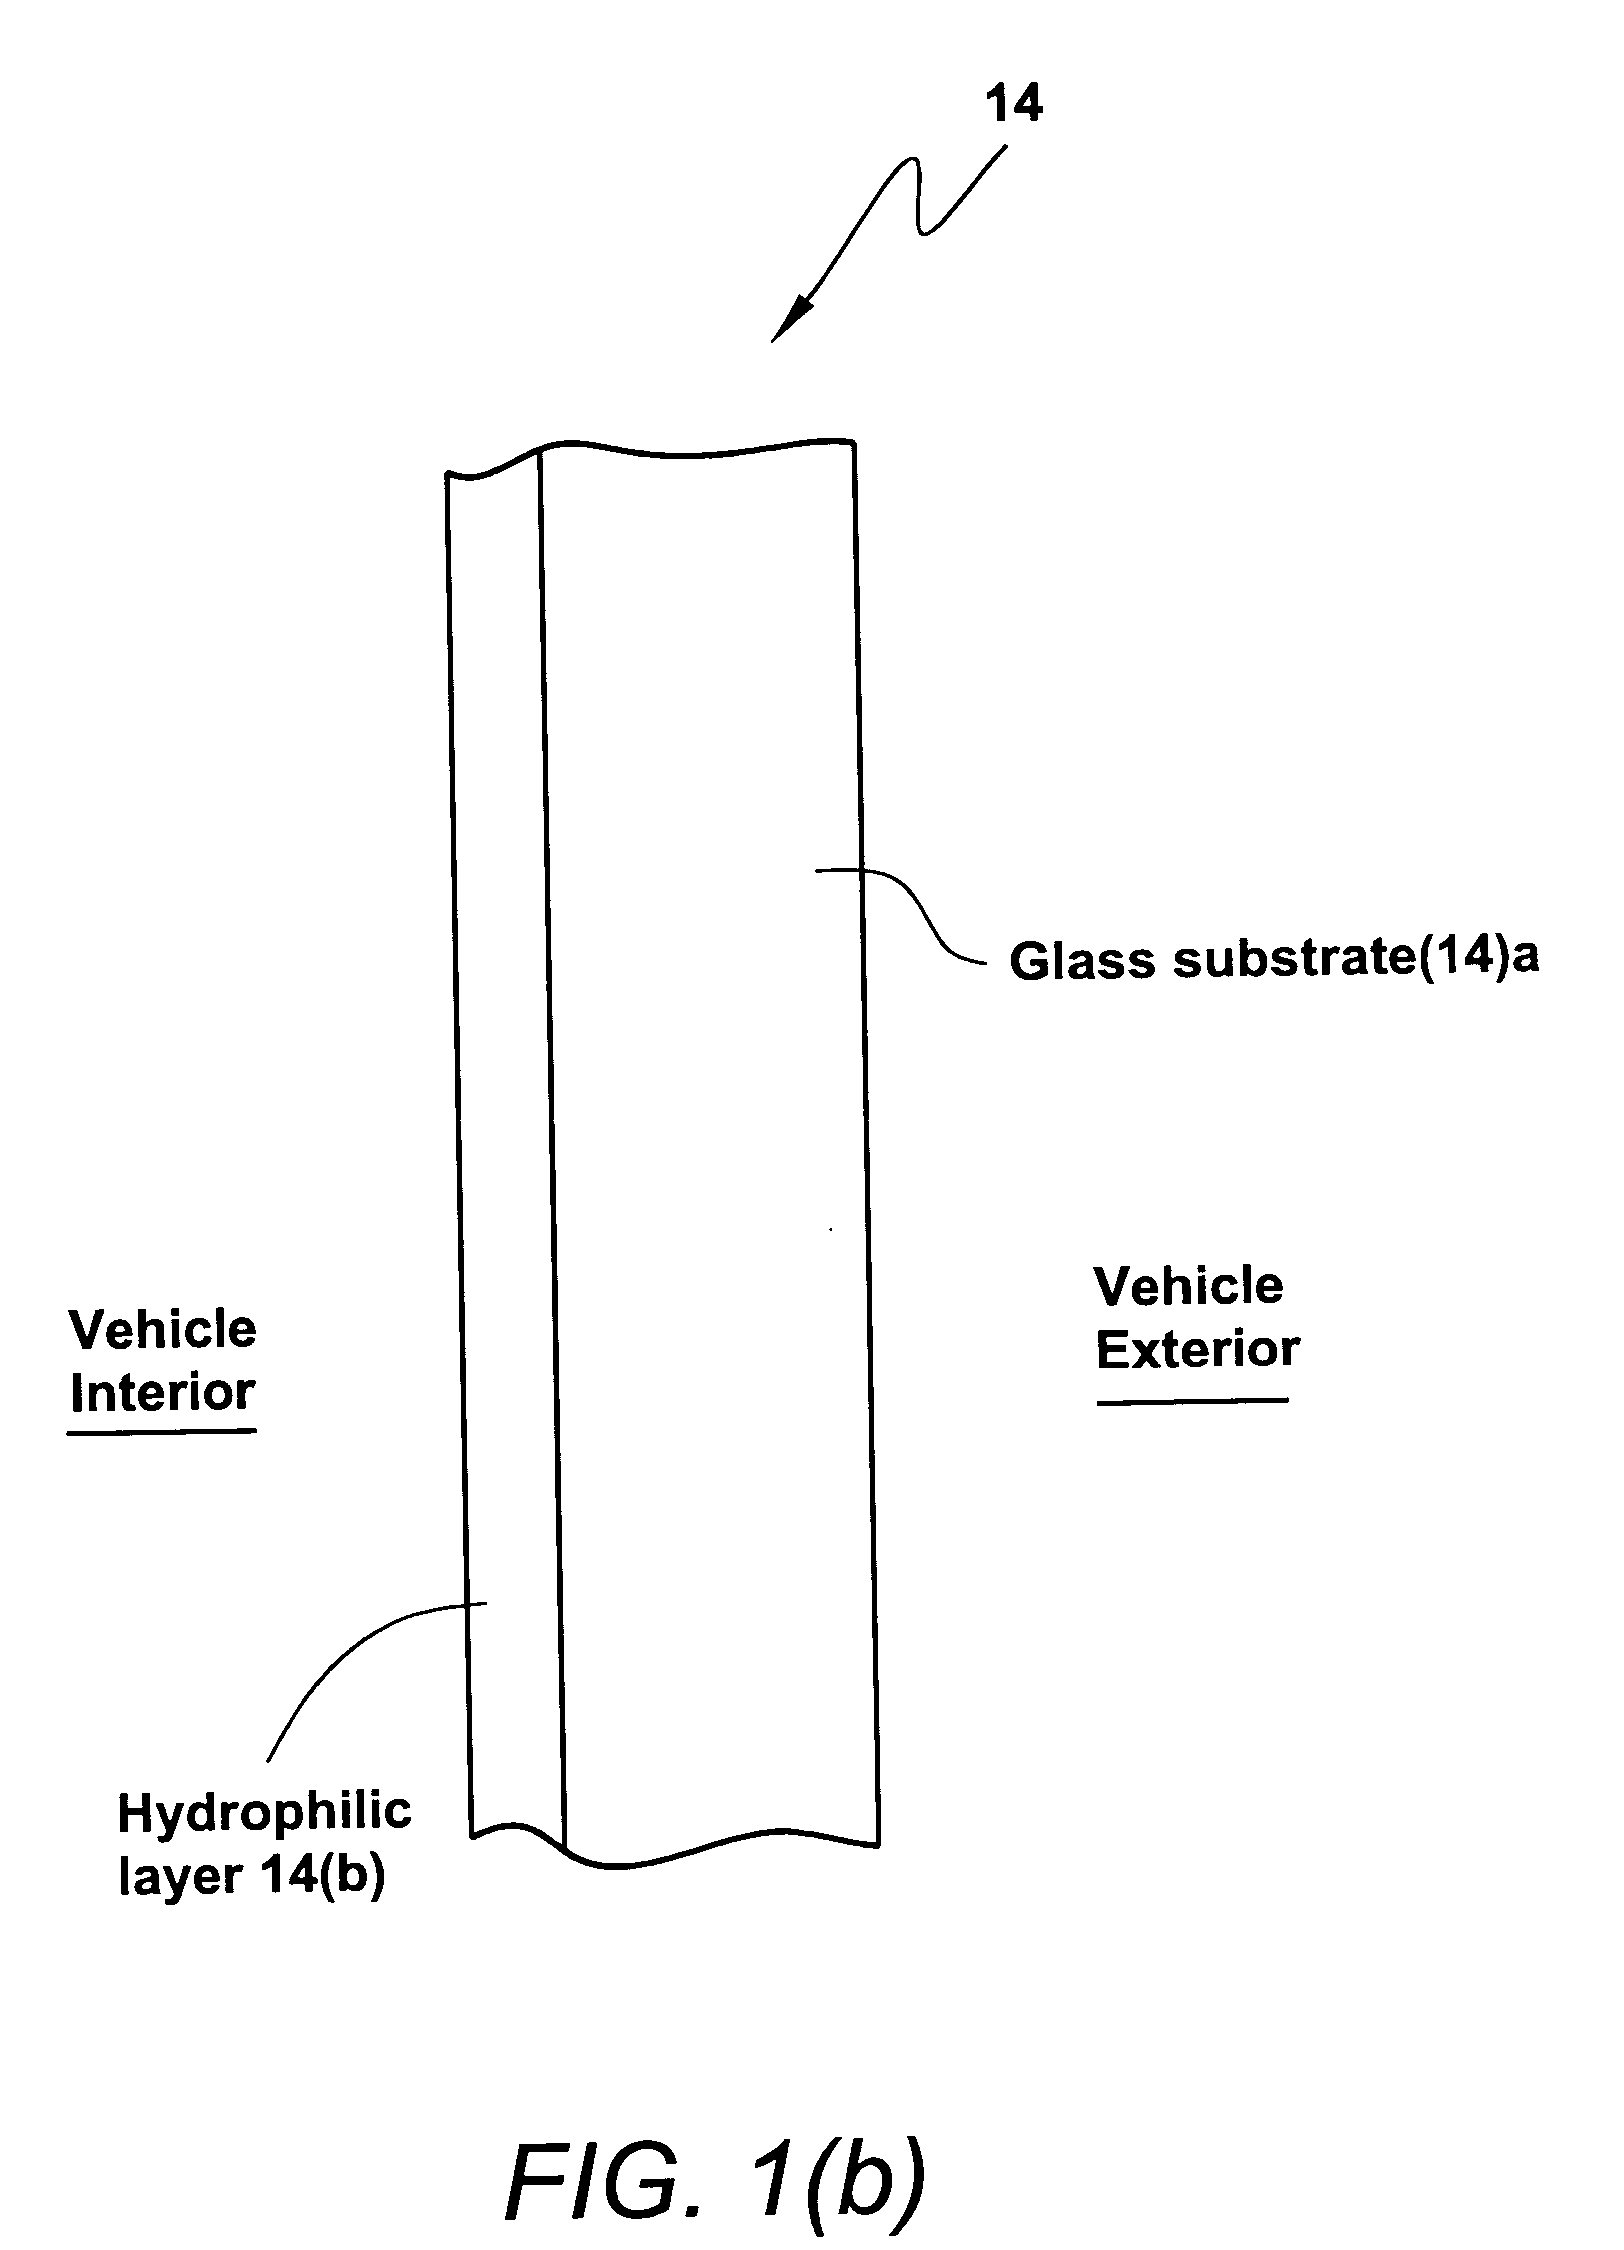 Flush-mounted slider window for pick-up truck with hydrophilic coating on interior surface thereof, and method of making same